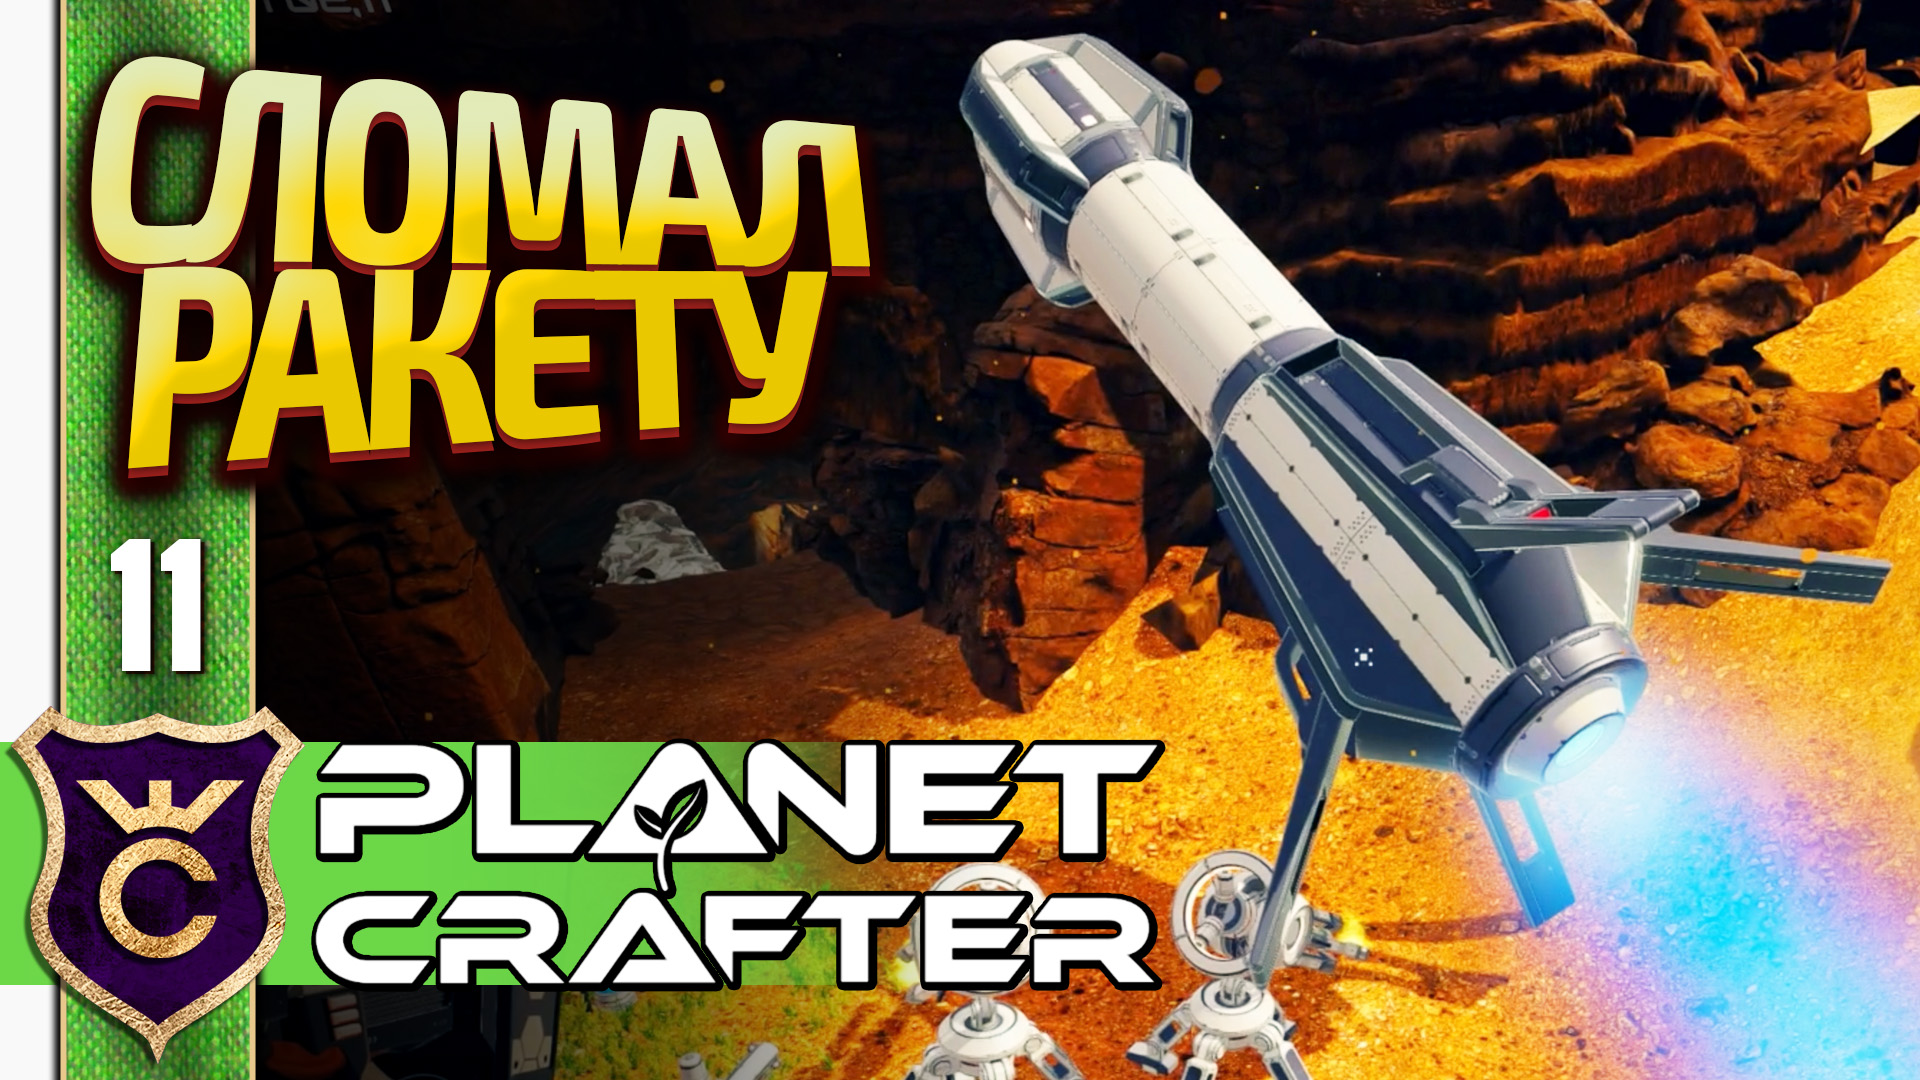 Planet crafter где уран. The Planet Crafter ракеты. ДНК манипулятор Planet Crafter. The Planet Crafter похожие. The Planet Crafter достижения.